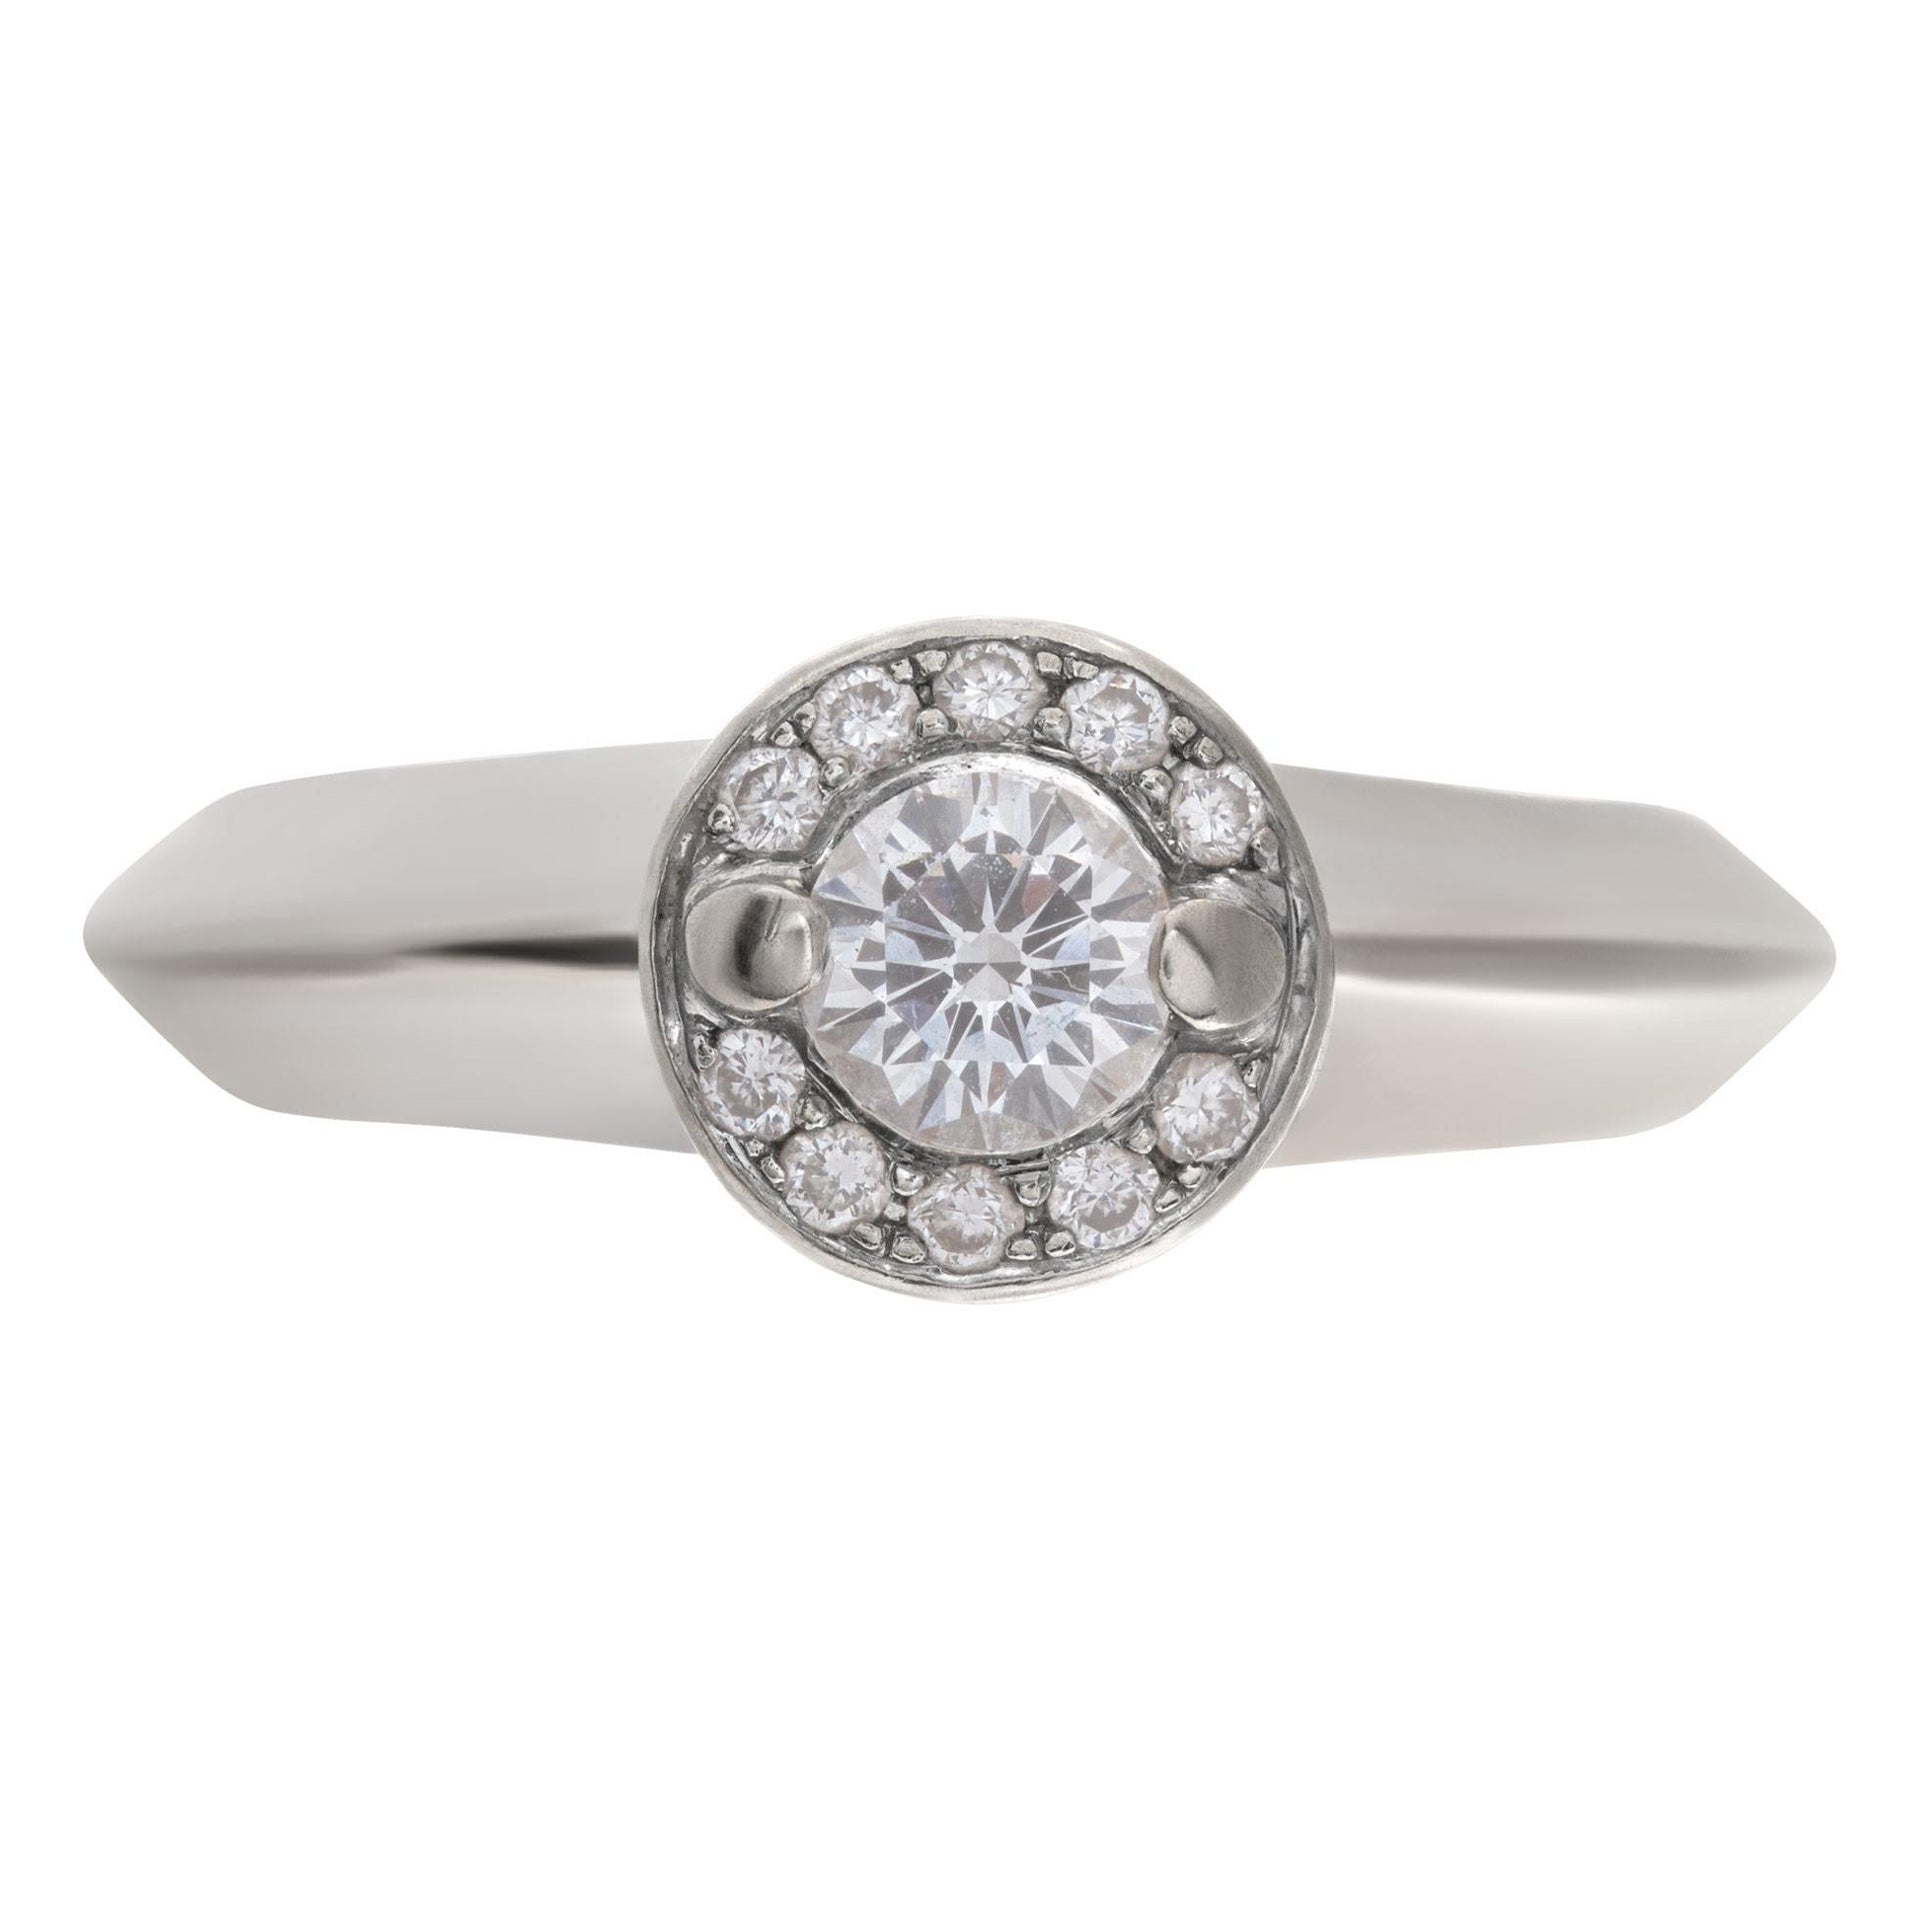 Diamond Ring in 18k White Gold with Approximately 0.43 Carats